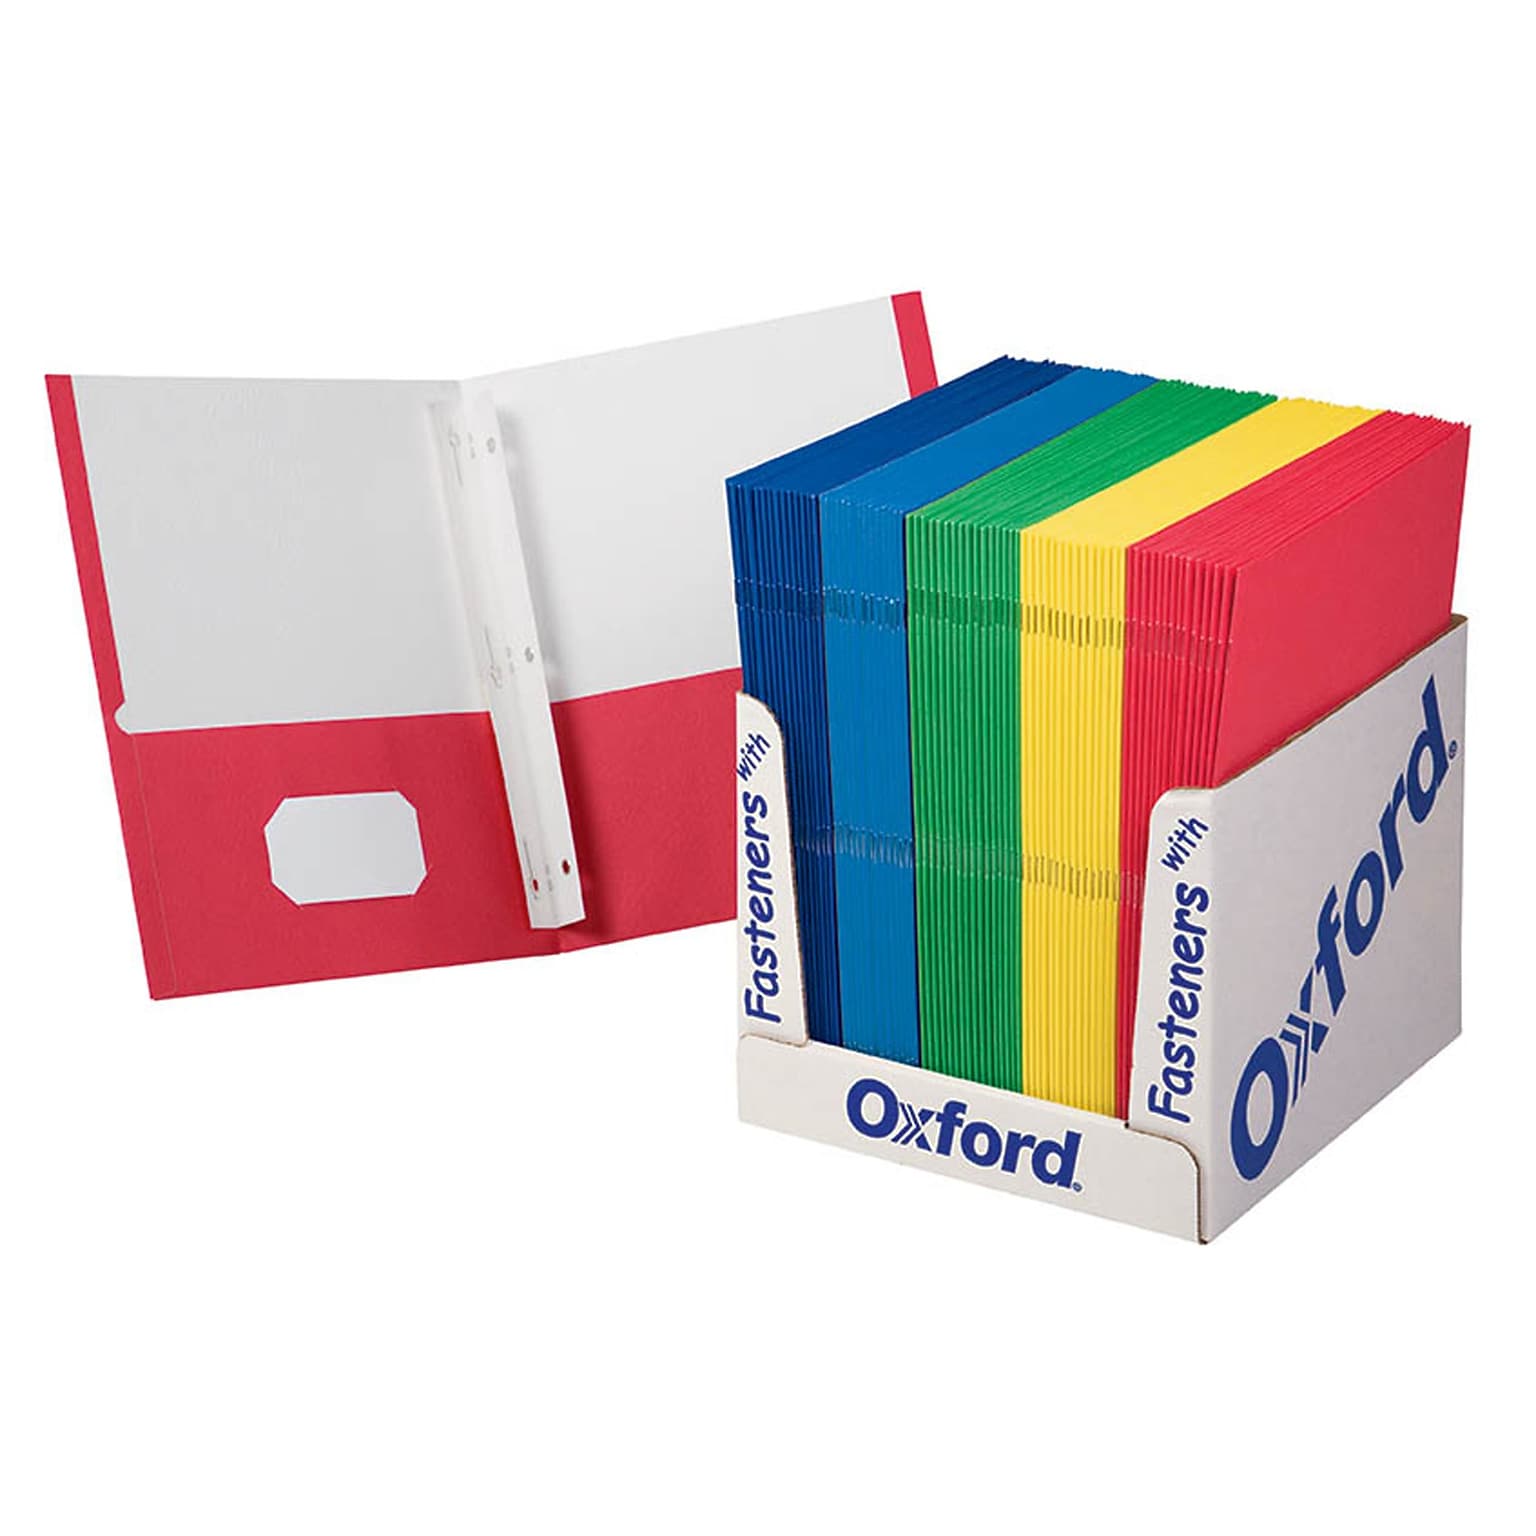 Oxford 2 Pocket Folders with Fasteners, Assorted Colors, 100/Box (ESS50764)